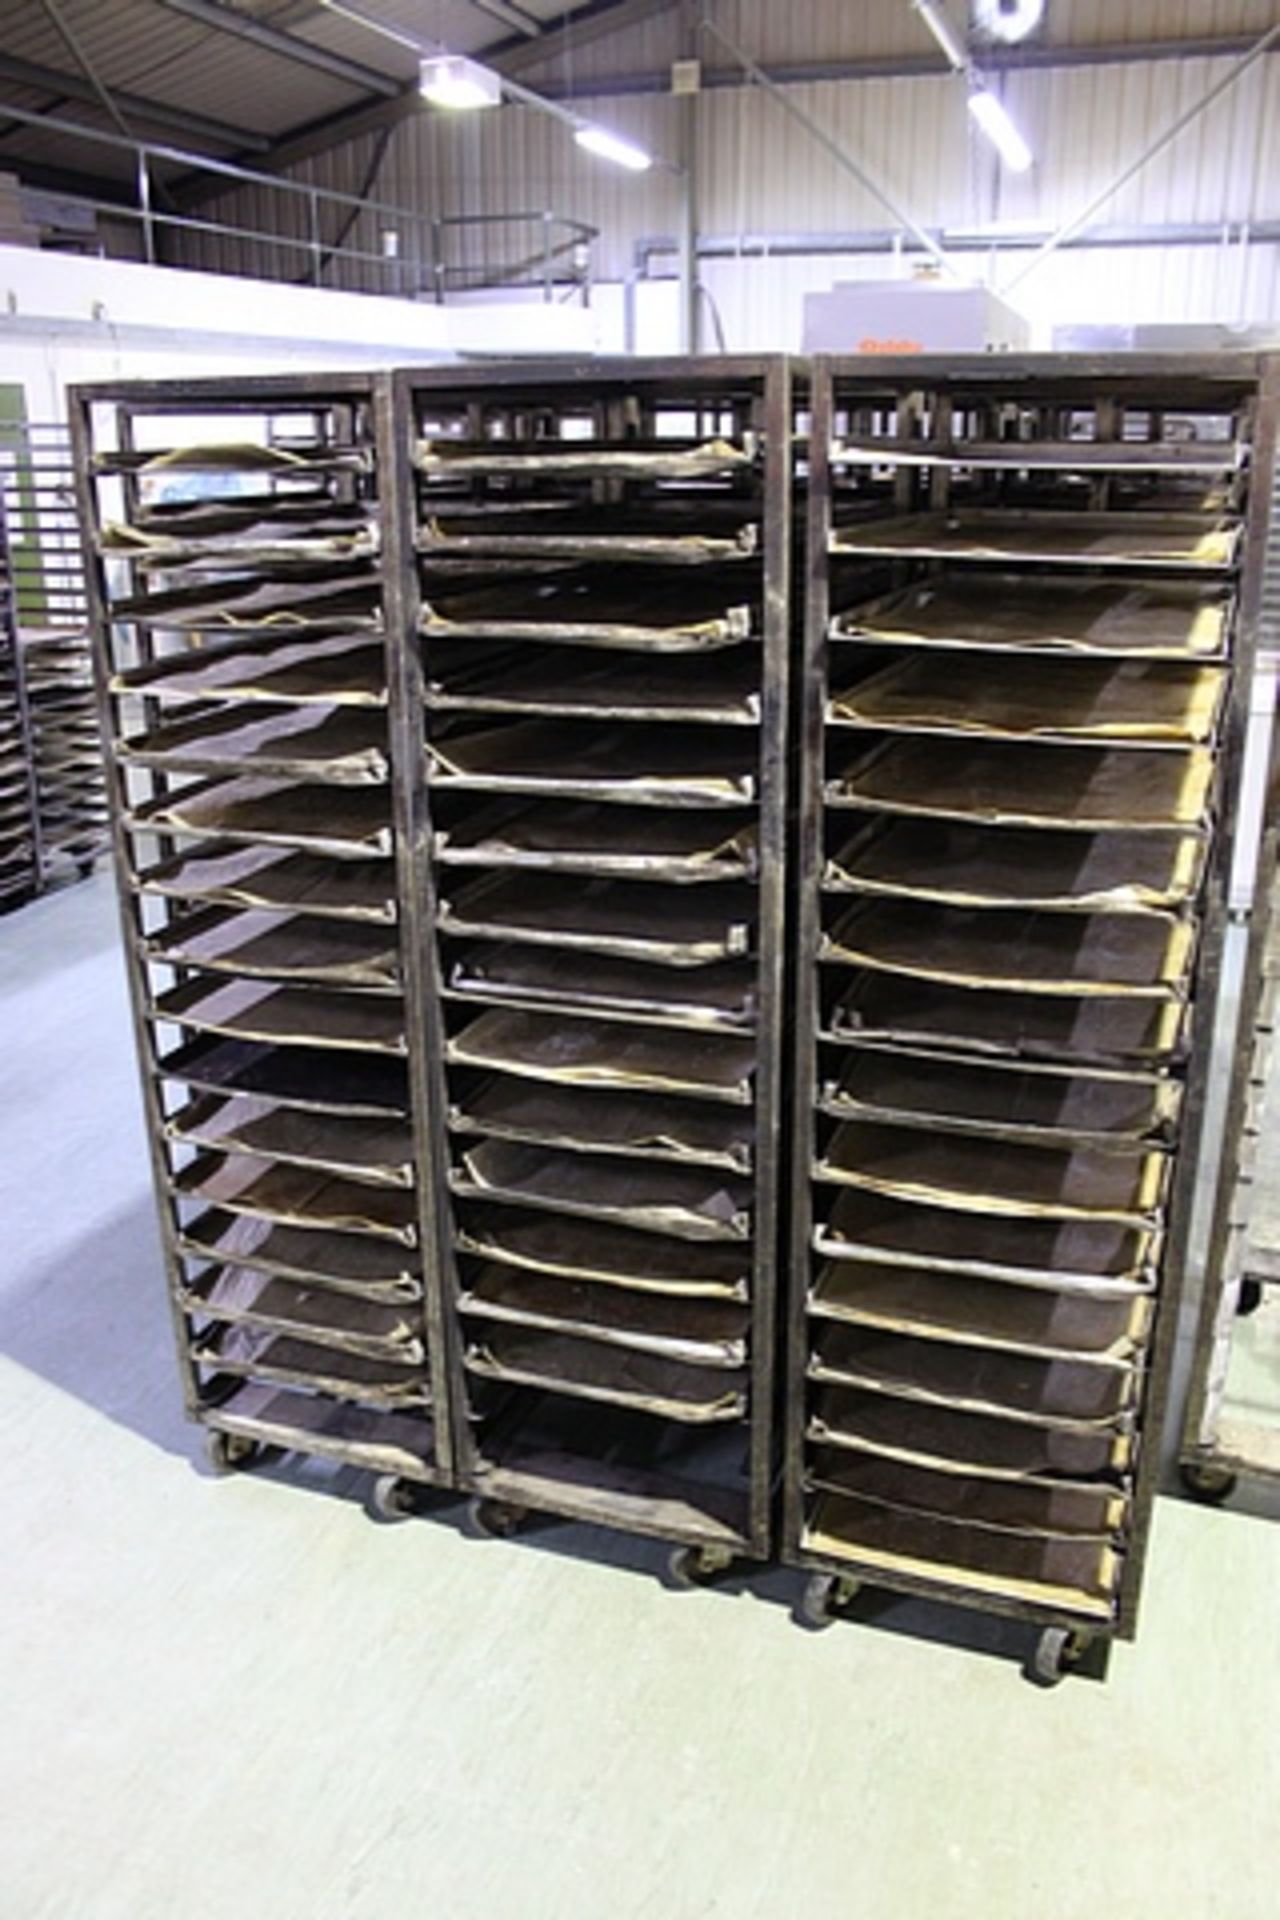 4 x stainless steel 16 tray bakery rack 770mm x 520mm x 1800mm